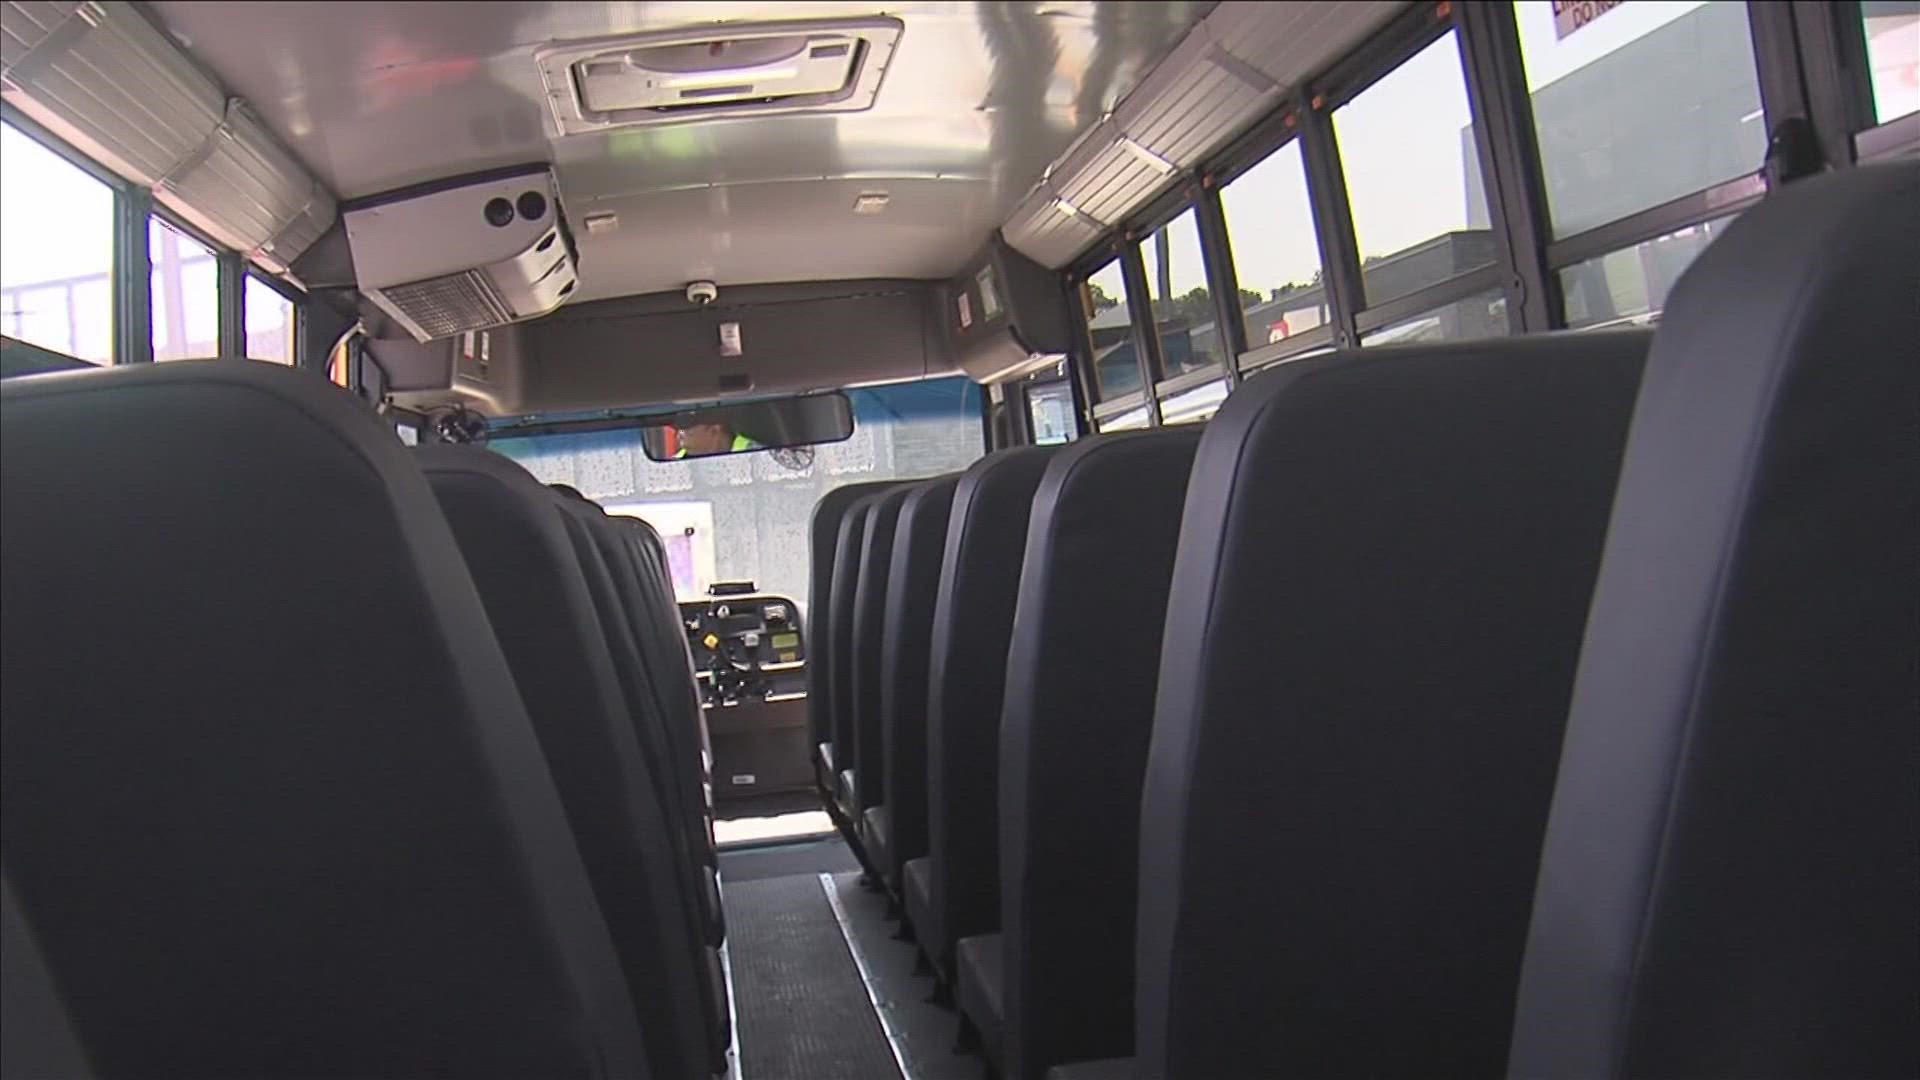 As the state's largest school district prepares for a news conference Tuesday, ABC 24 shares what we know about the driver situation.